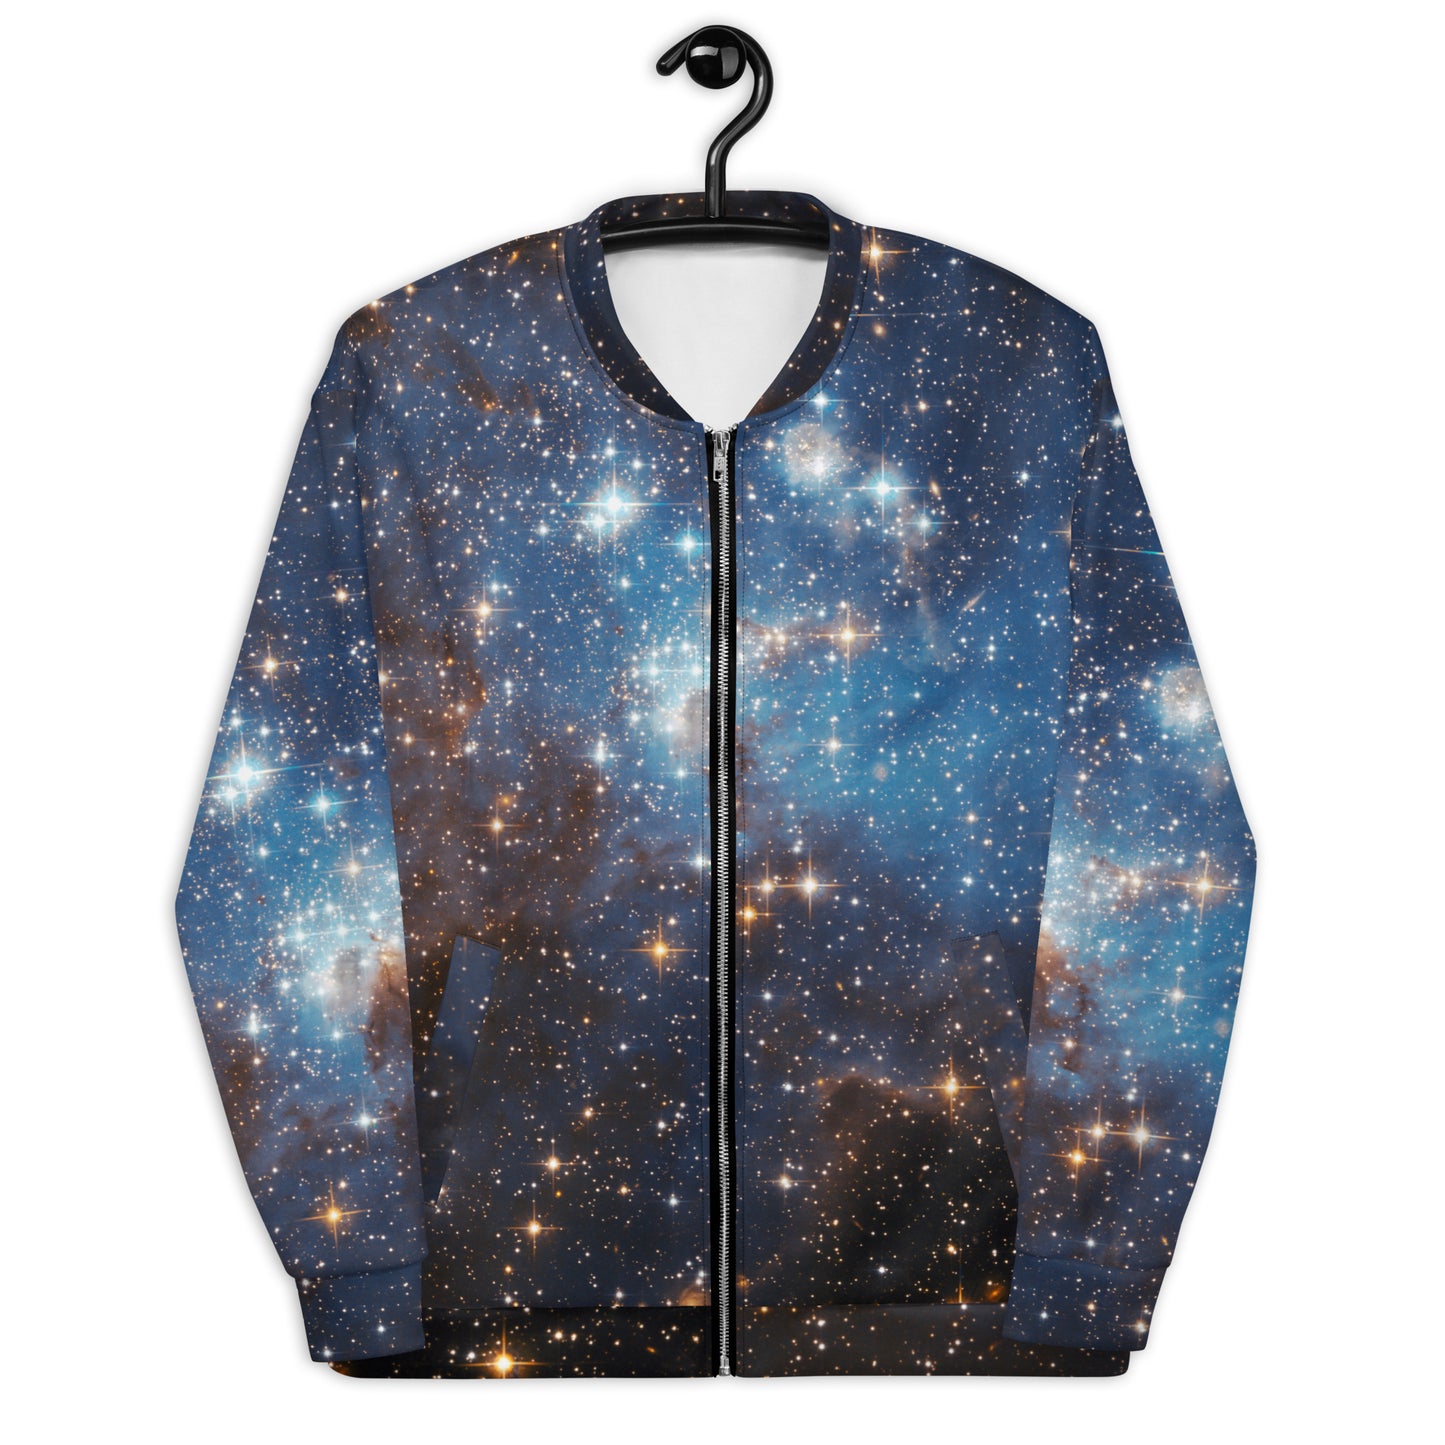 Grizzshopping Starfield Galaxy Space Blue Cloud Print Men's Bomber Jacket